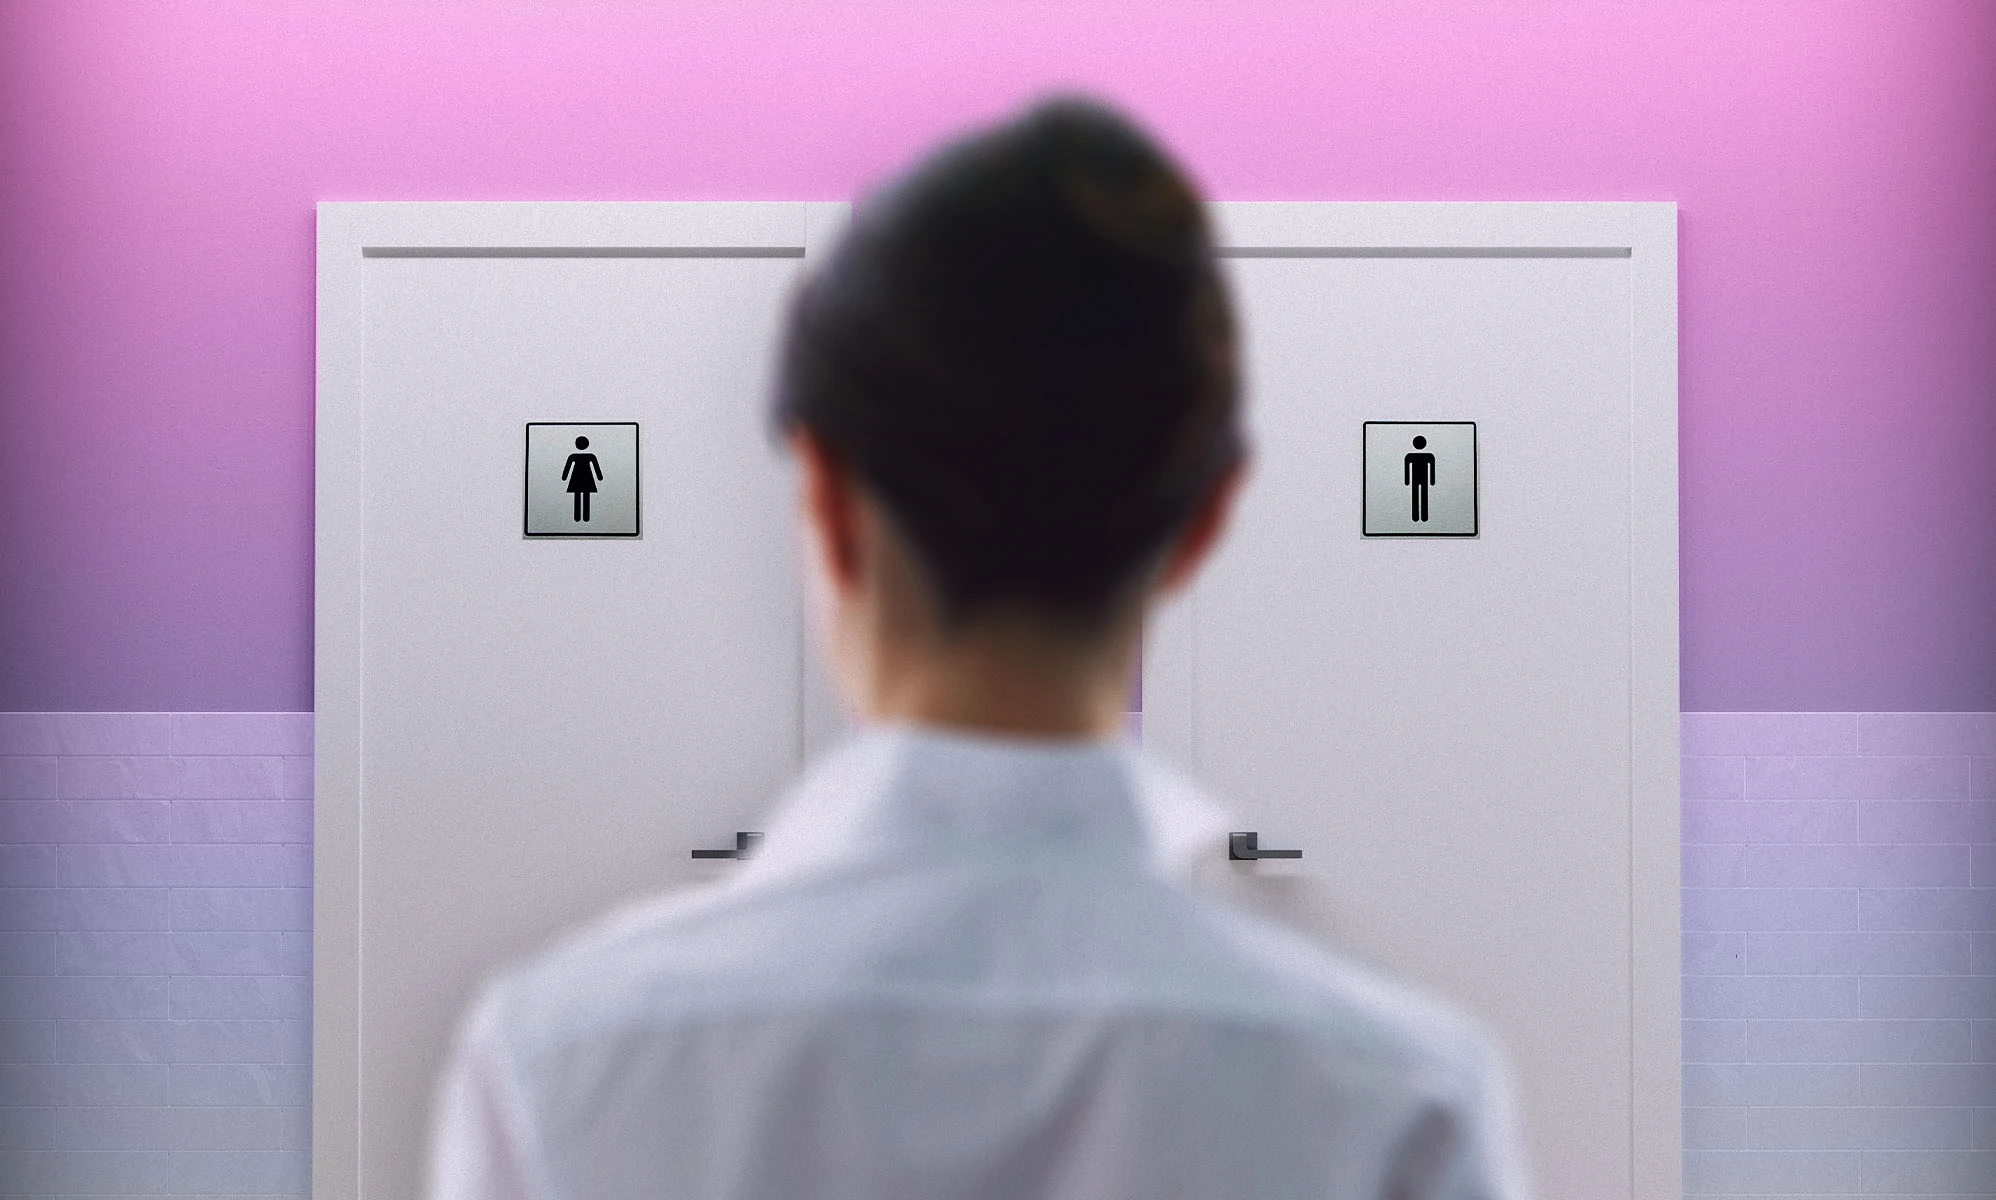 Civil servants feel 'degraded' by gender critical staff group and bathrooms threat